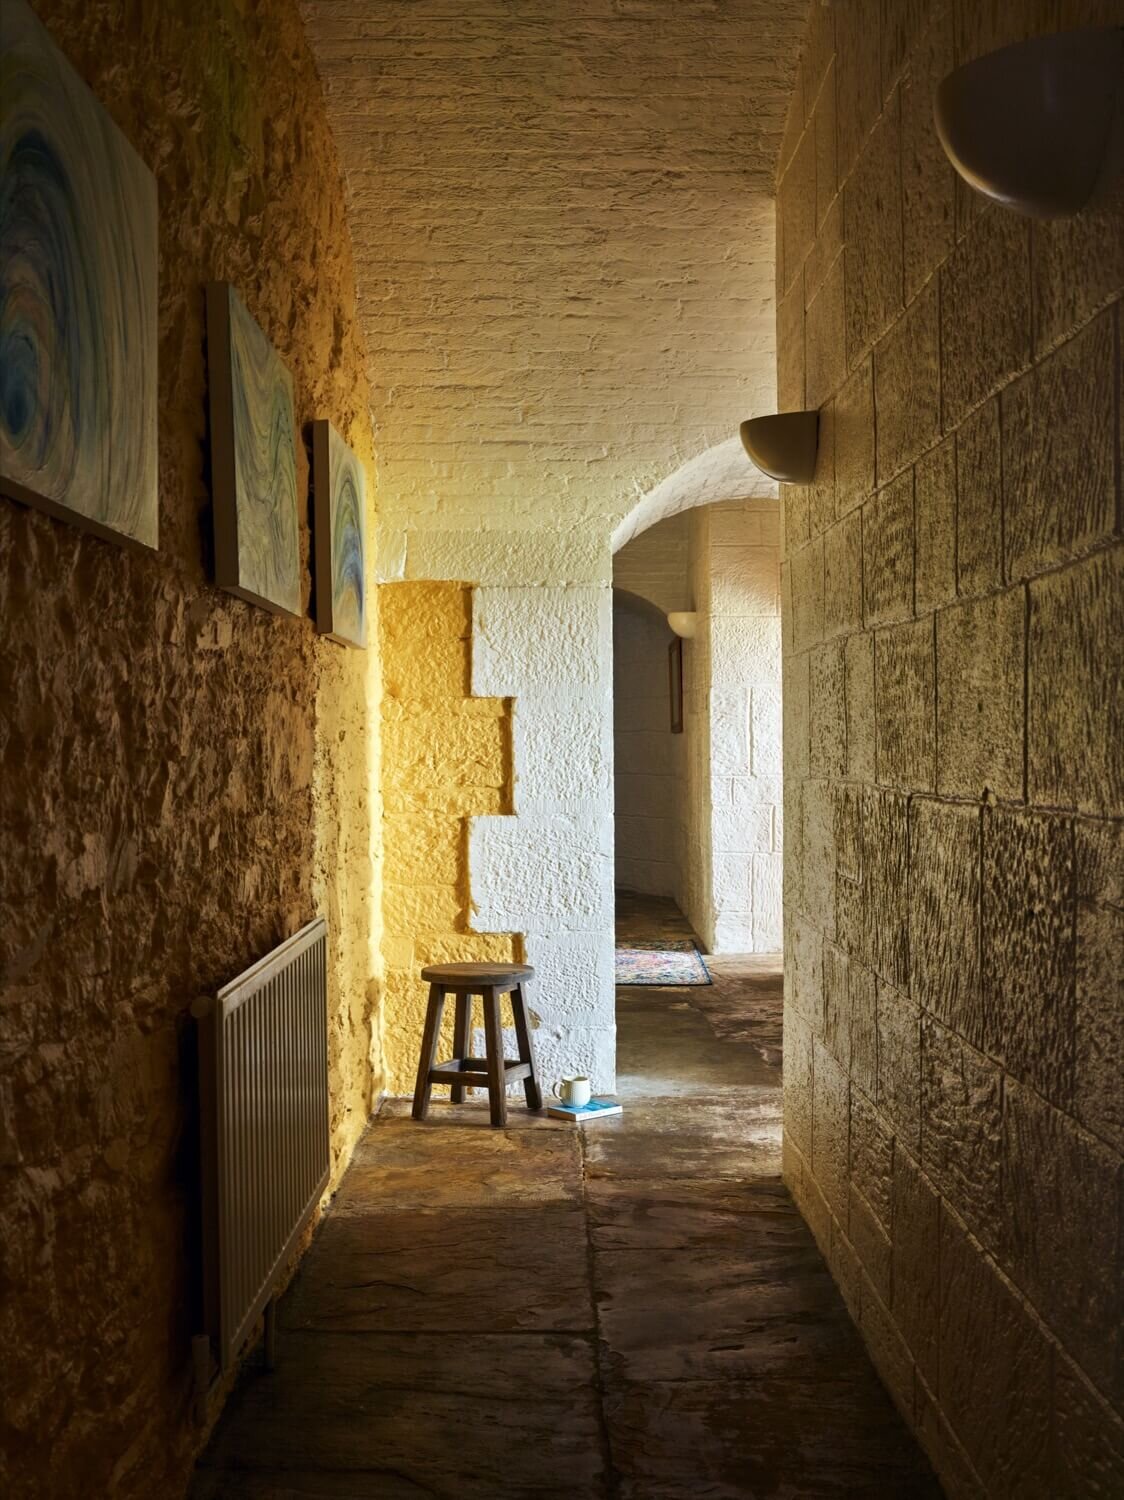 The hallways at Polhawn Fort